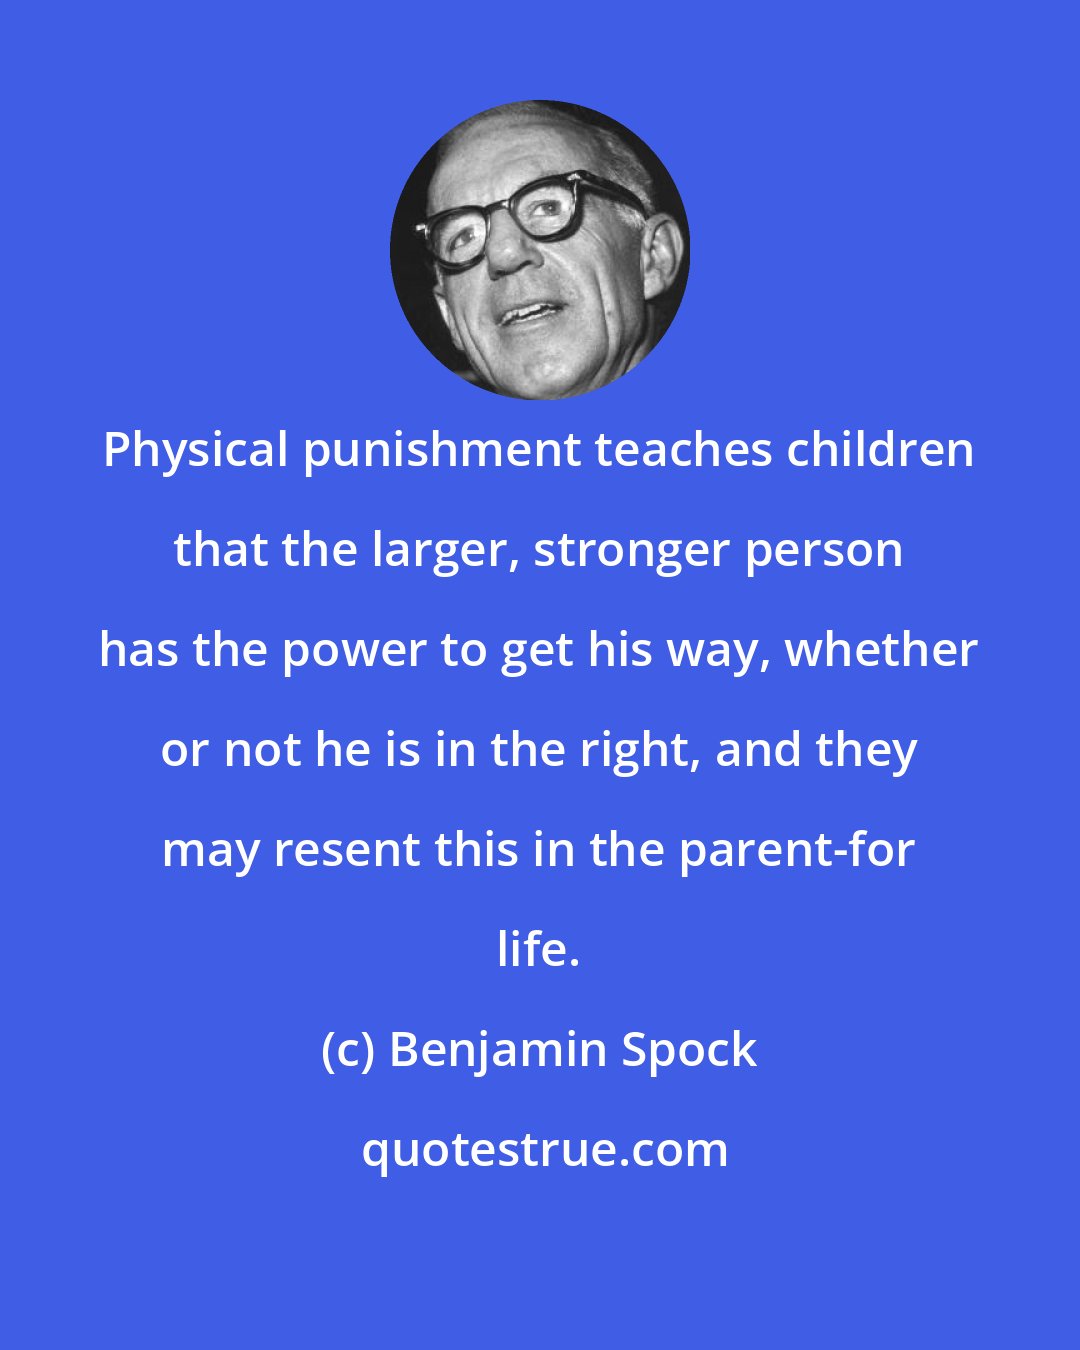 Benjamin Spock: Physical punishment teaches children that the larger, stronger person has the power to get his way, whether or not he is in the right, and they may resent this in the parent-for life.